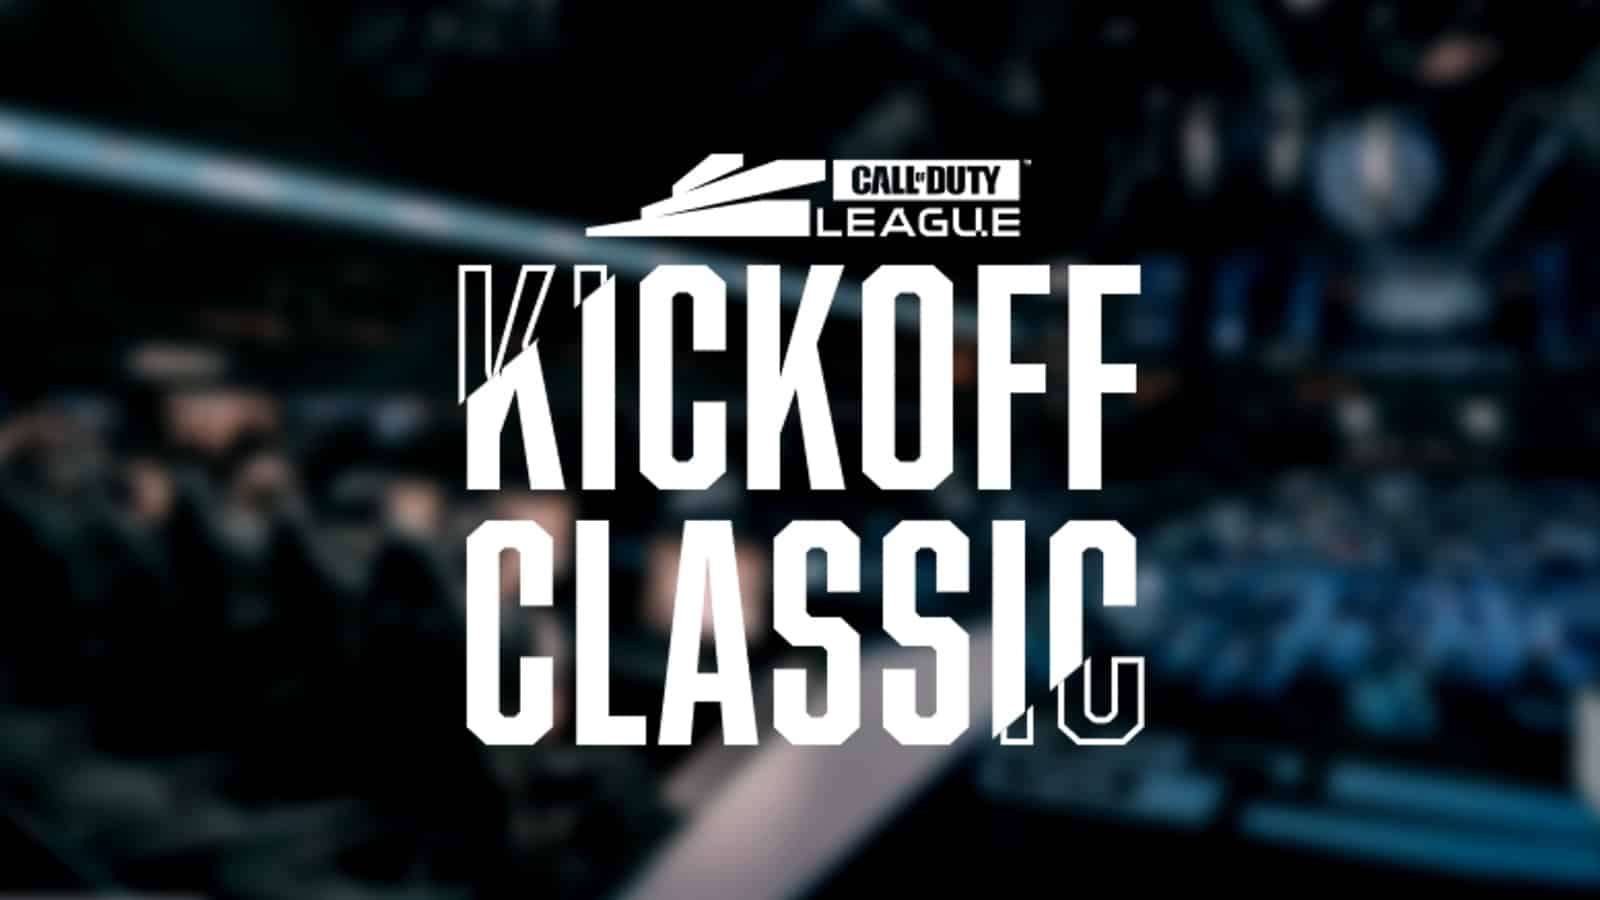 cdl kickoff classic logo over blurred background of cdl event